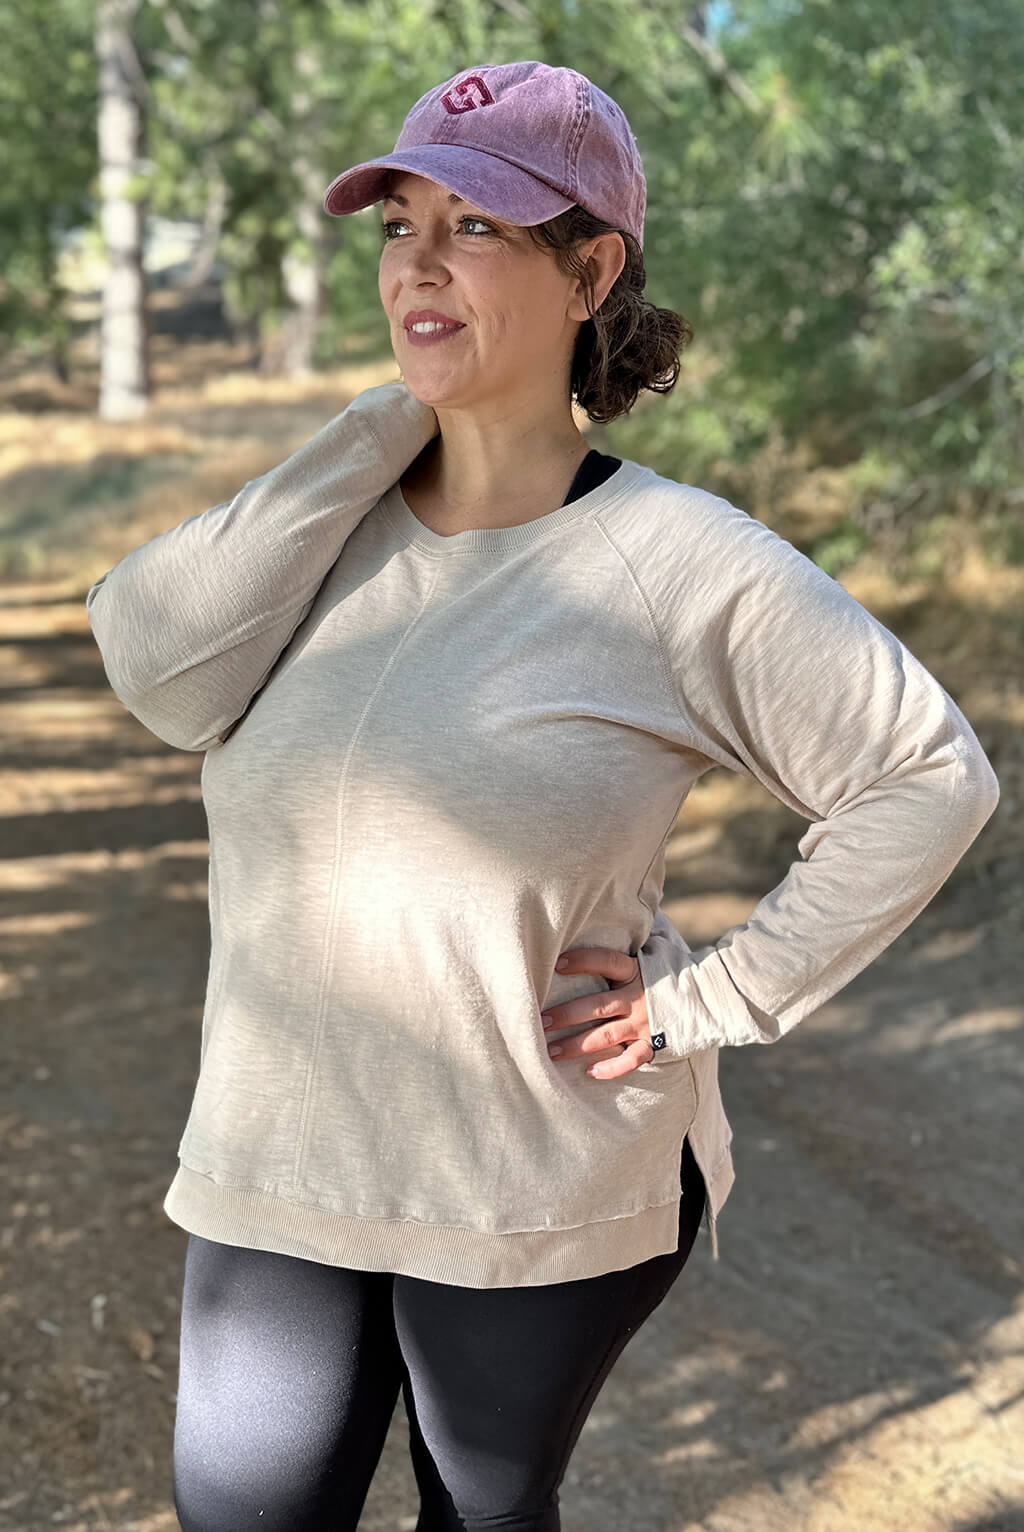 Plus size model poses on trail wearing long sleeve textured top and hat.